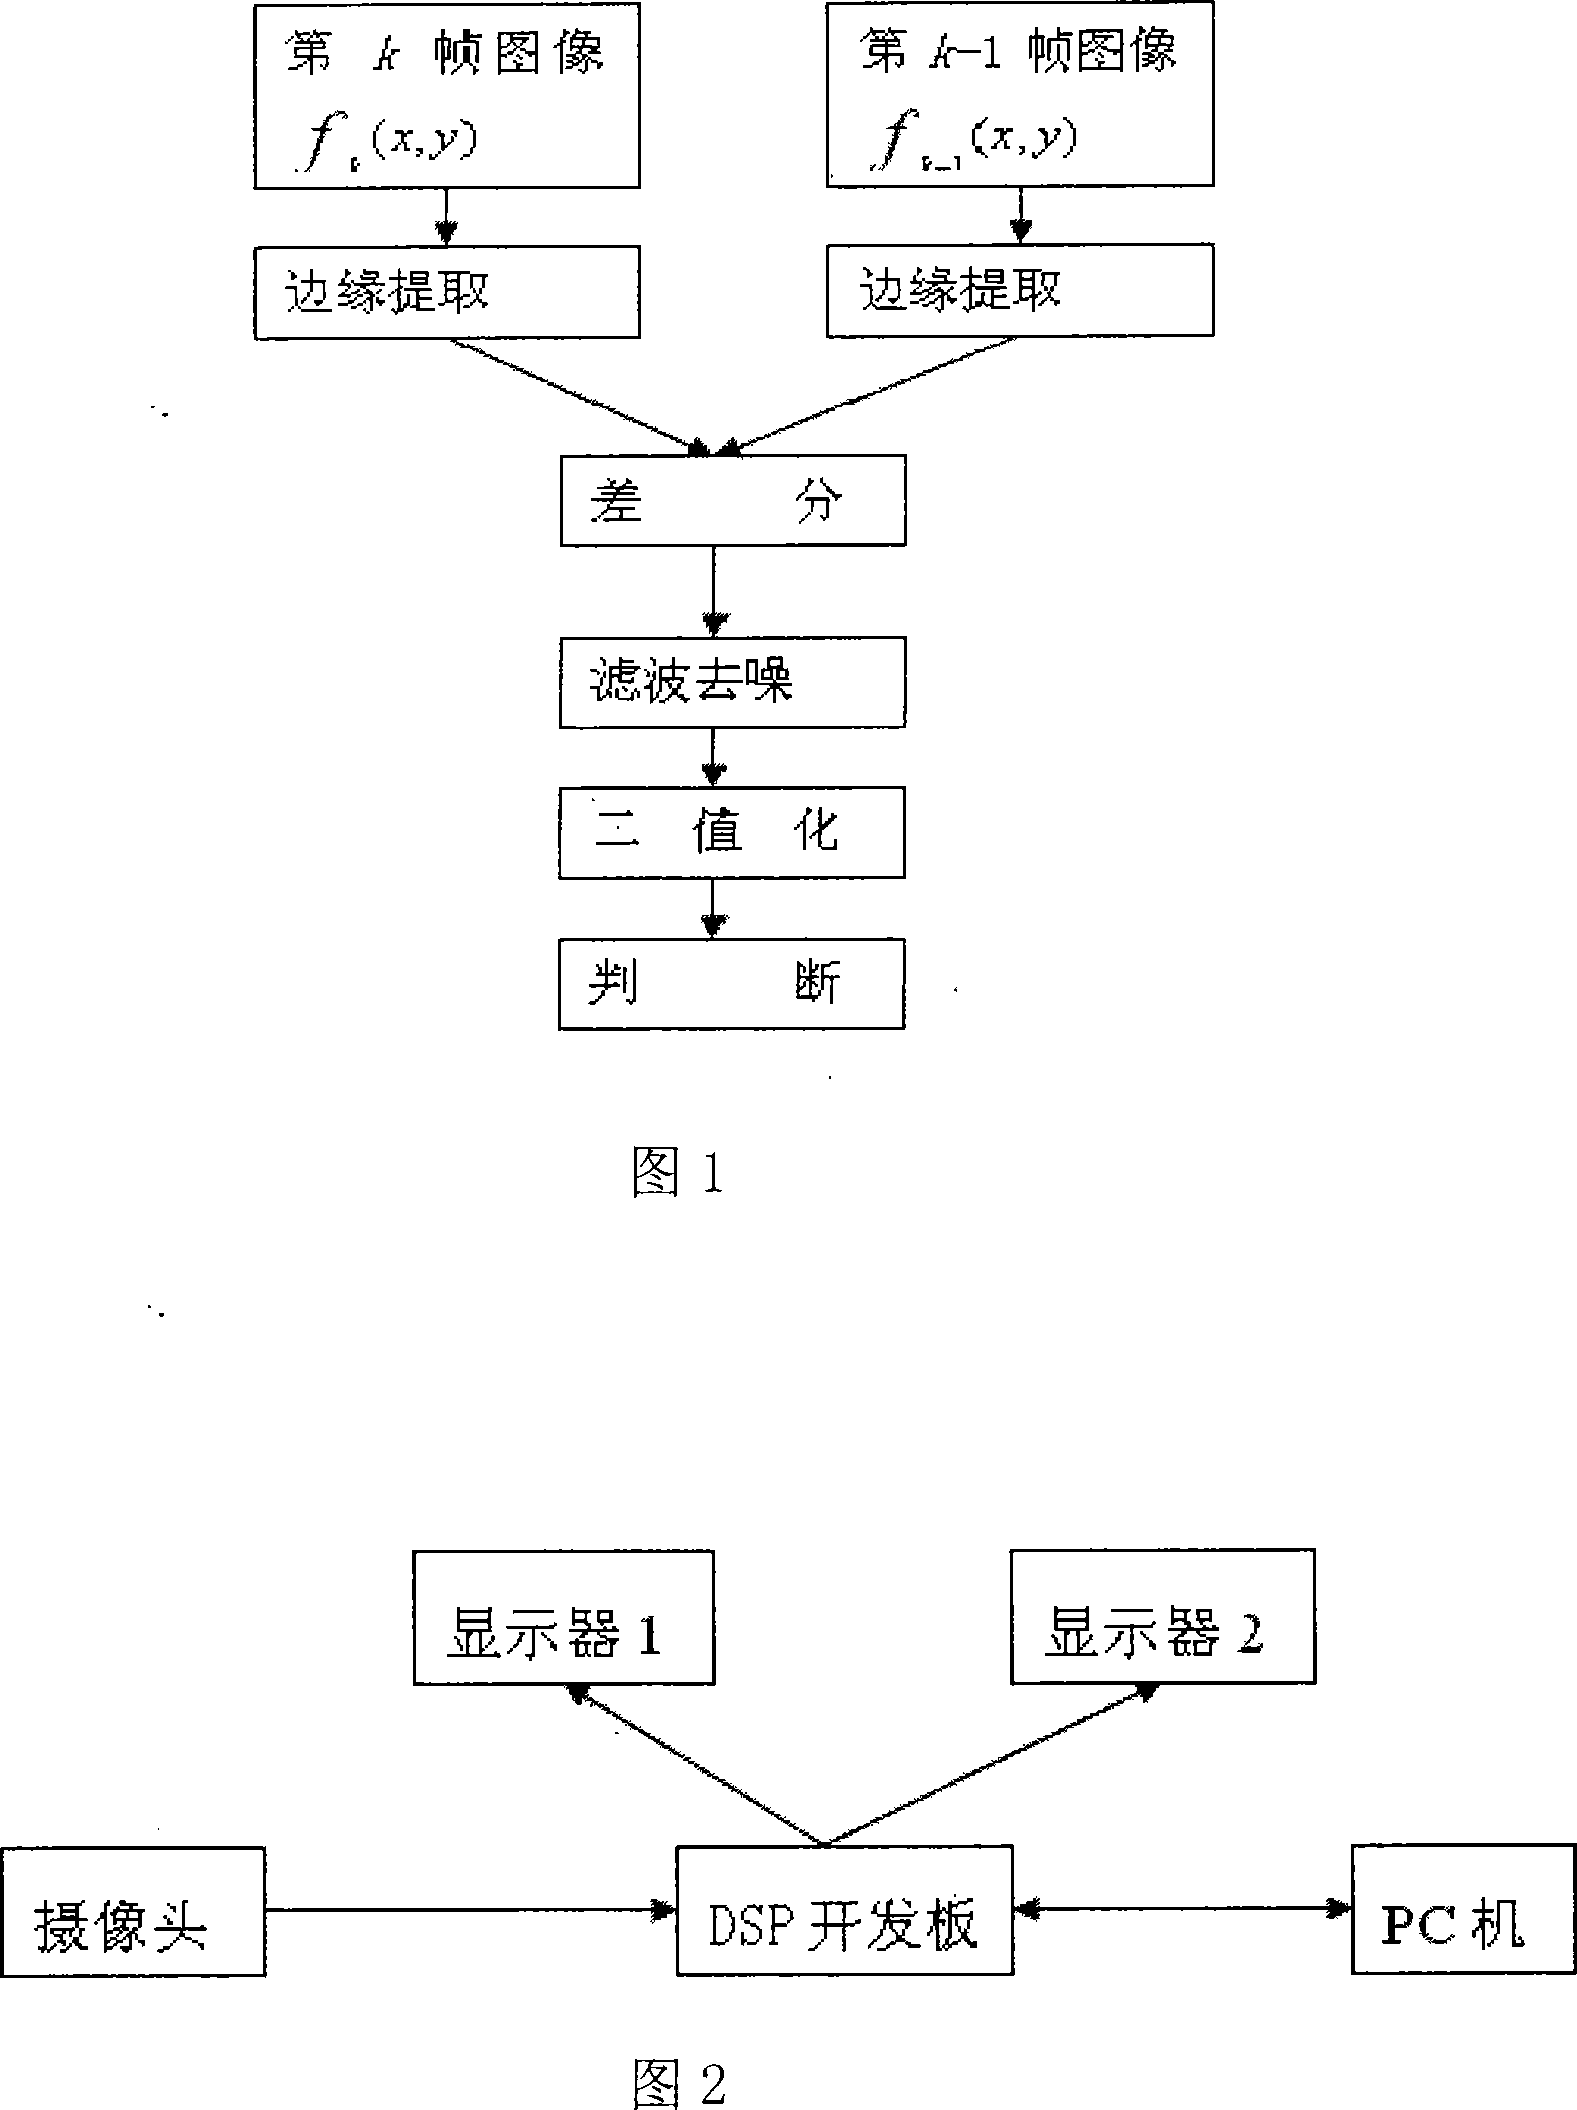 Method of detecting single moving target under complex background